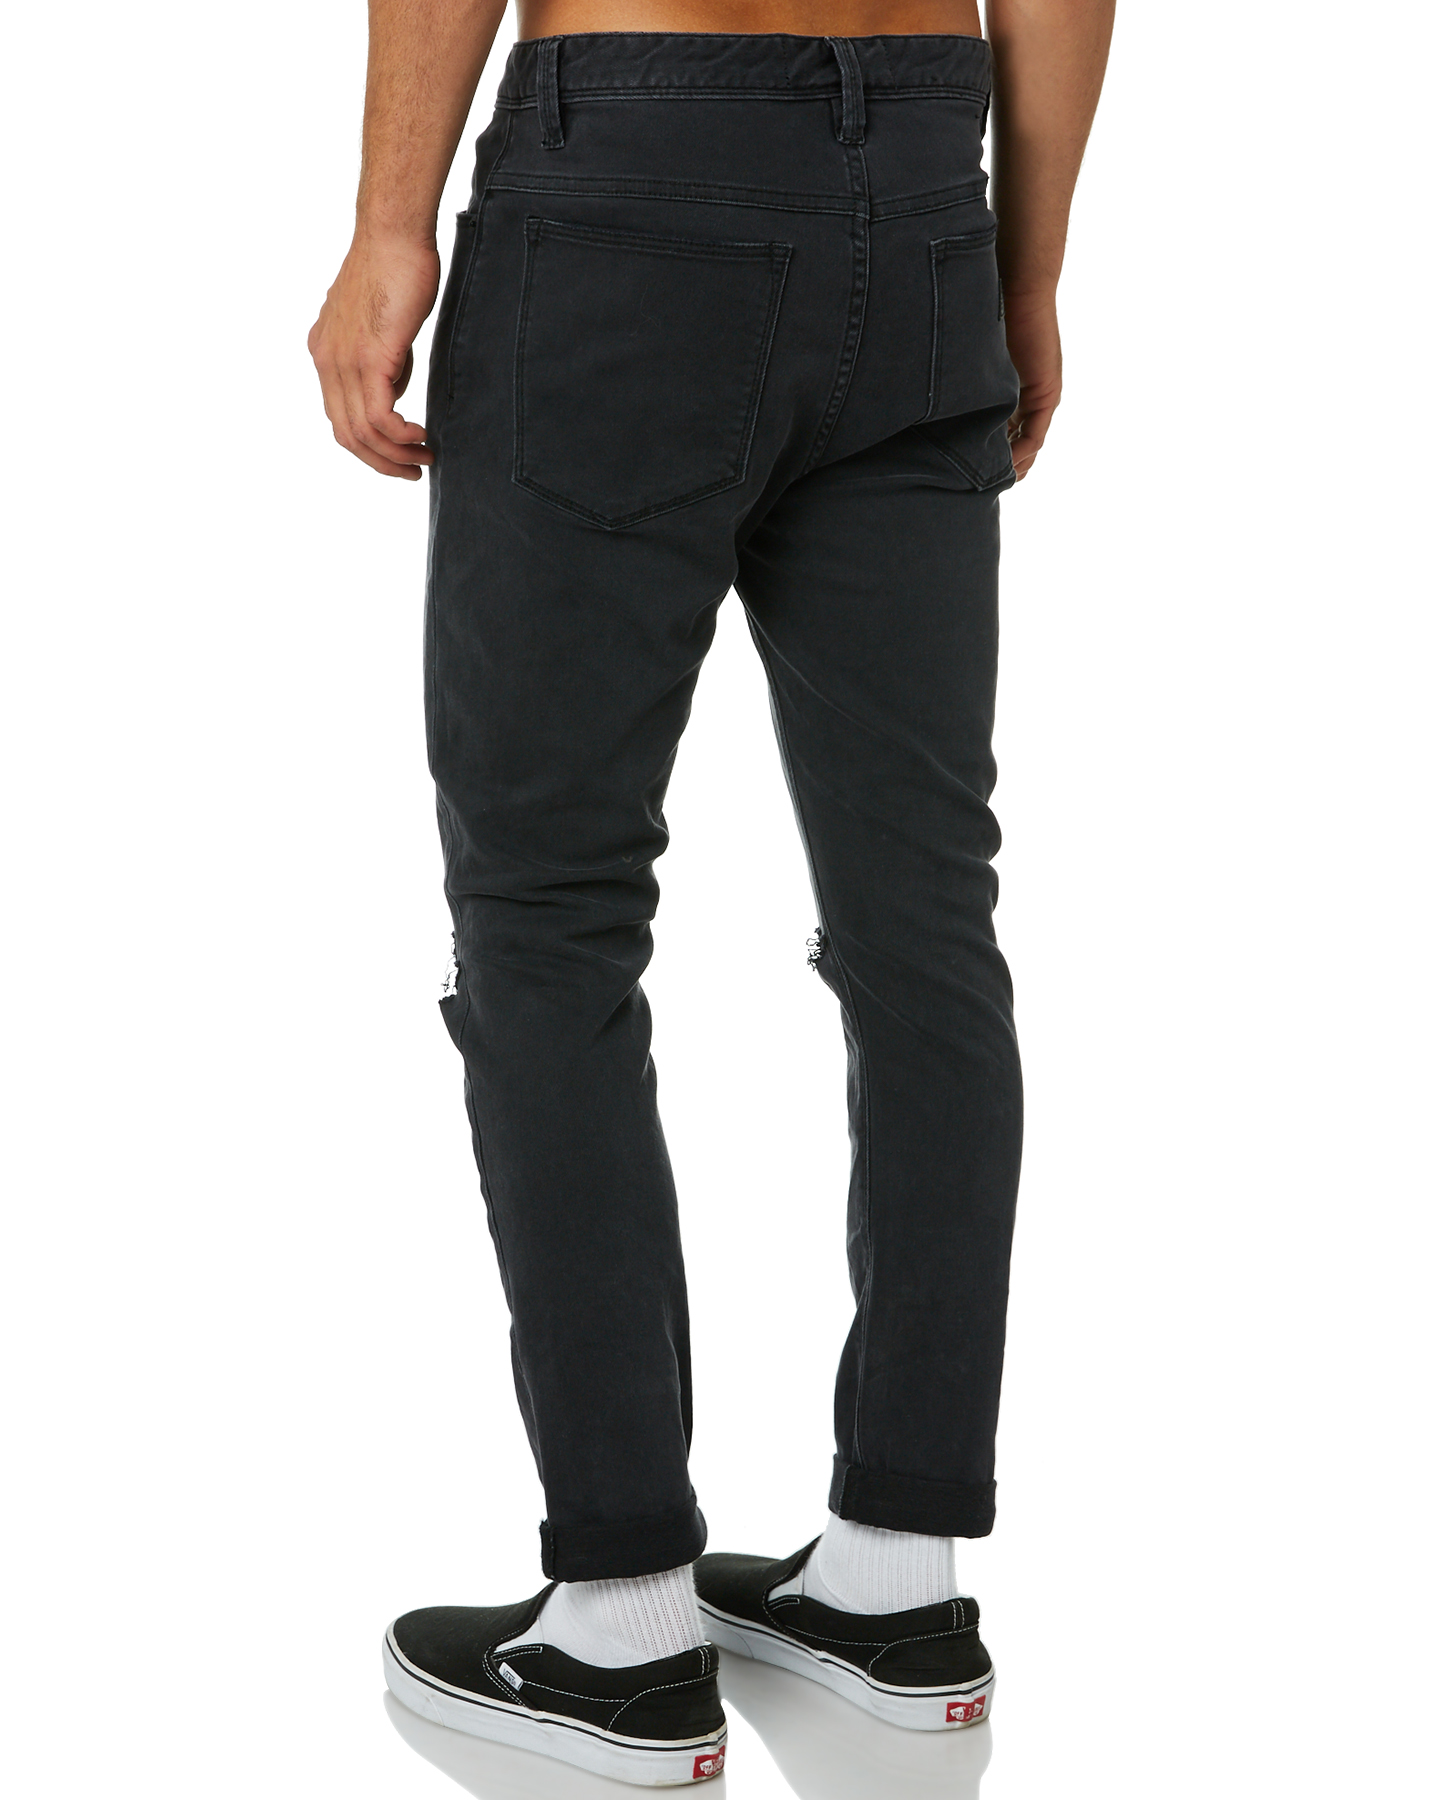 Abrand A Dropped Slim Turn Up Mens Jean - Smoked | SurfStitch